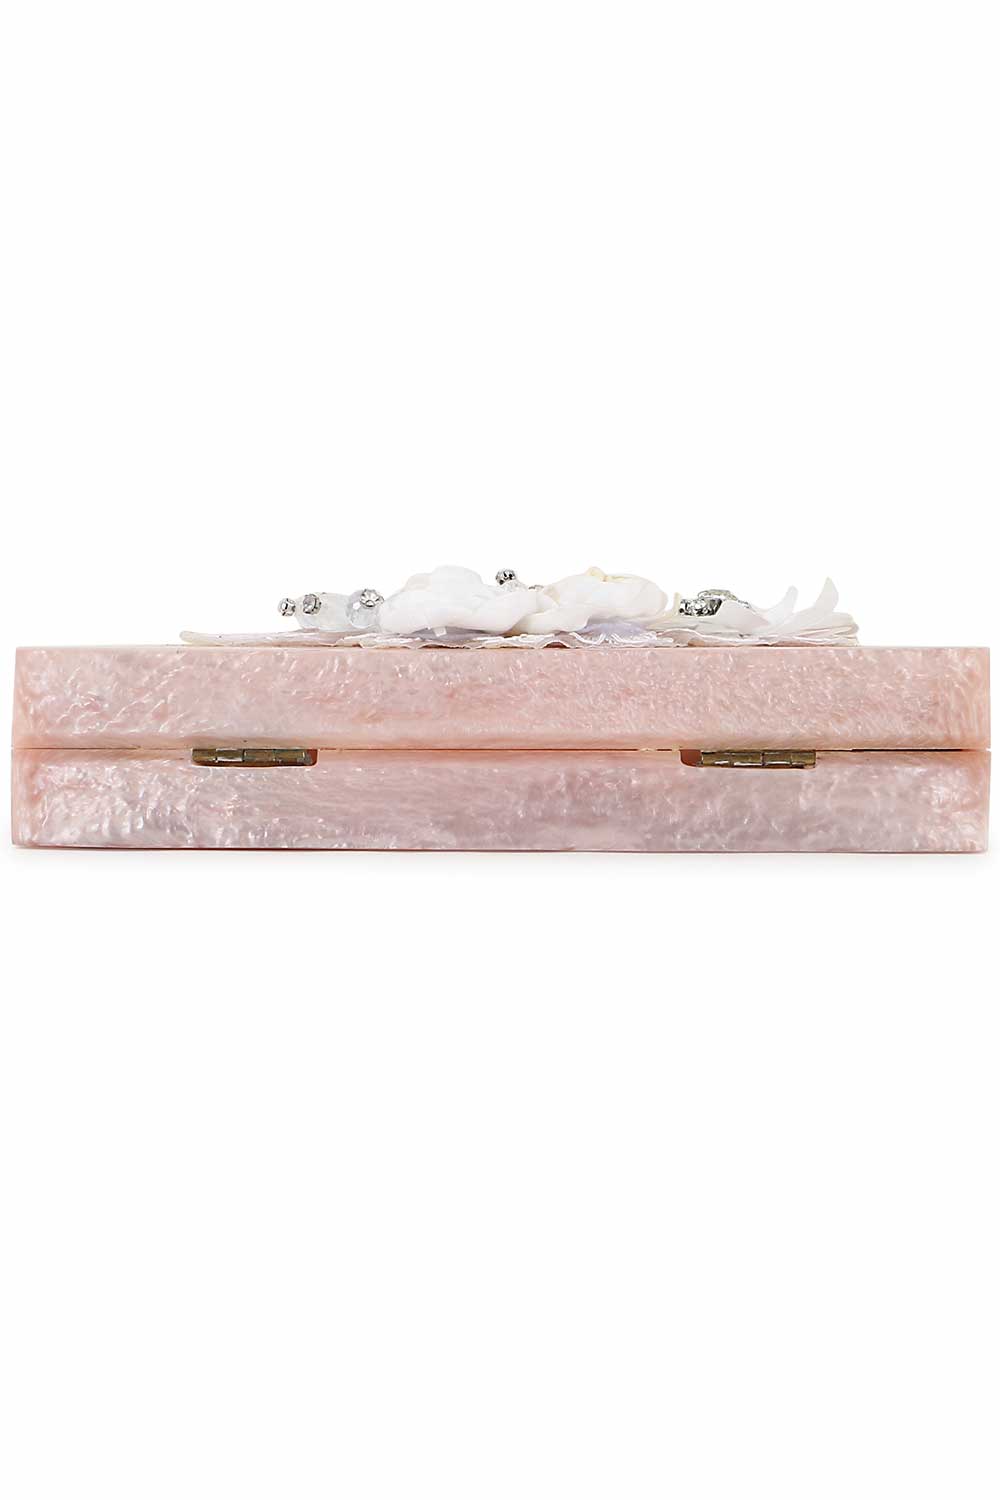 Pastel Pink And White Resin Floral Embellished Clutch